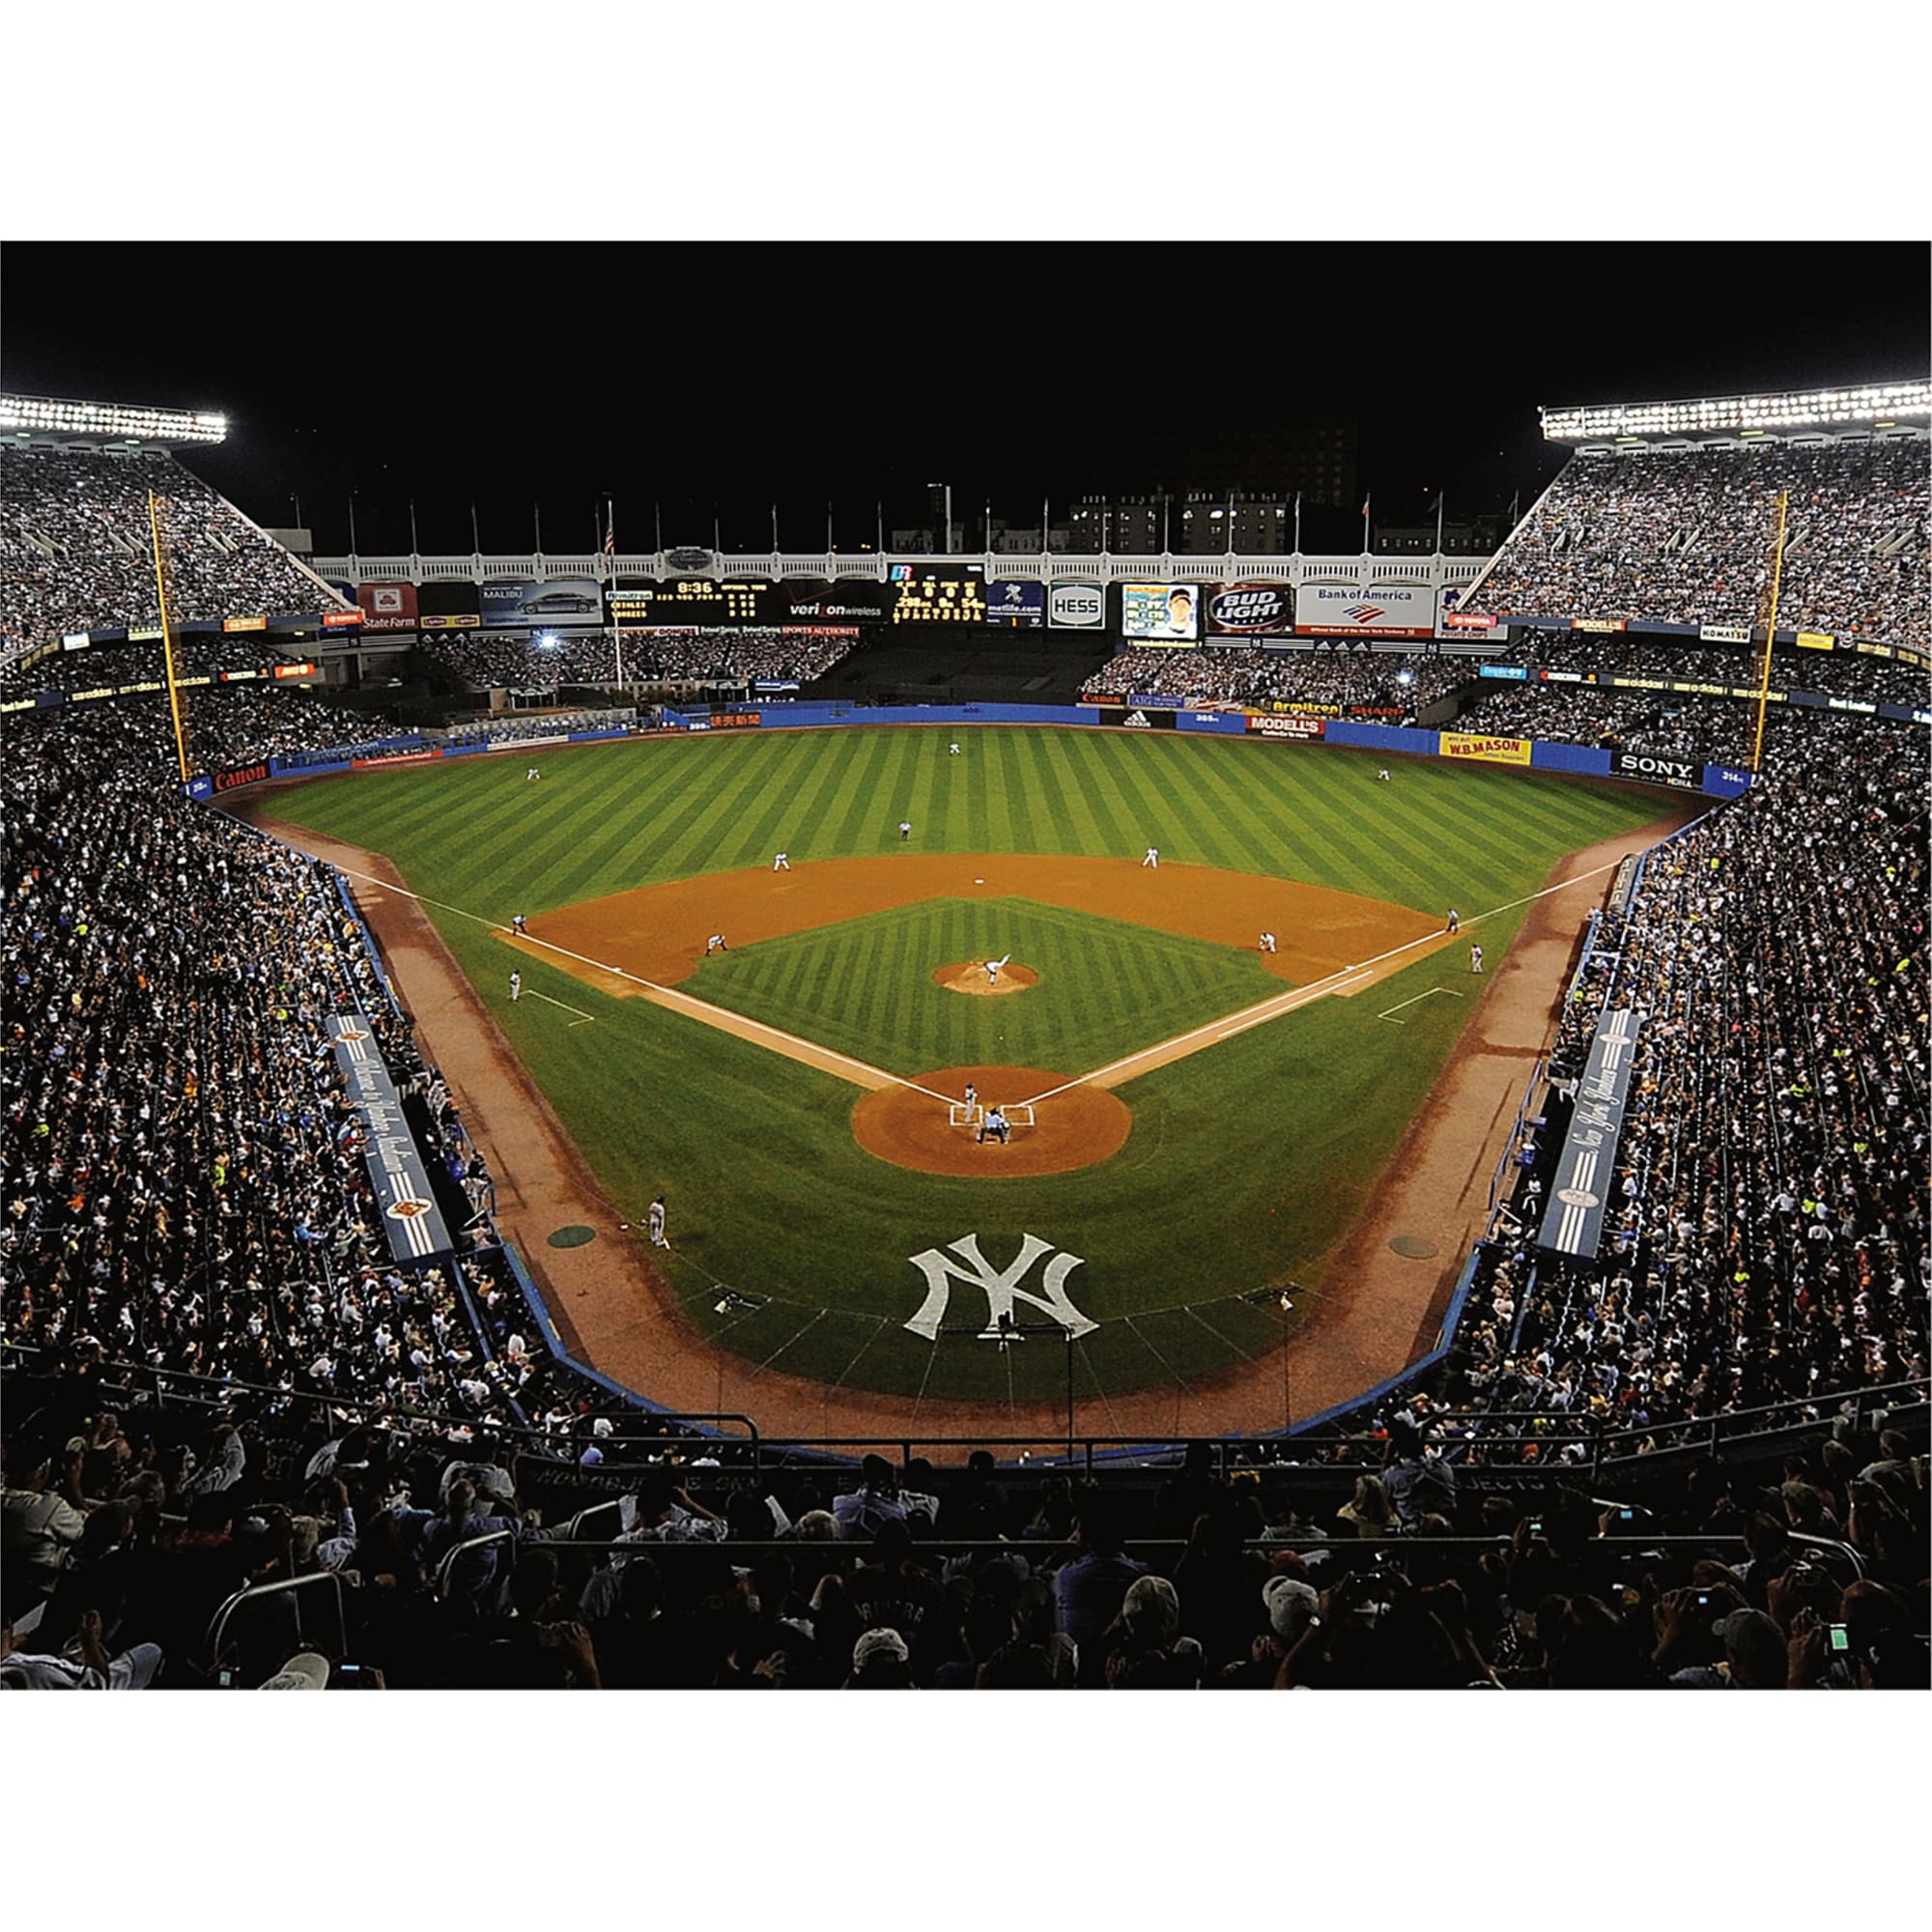 Fathead New York Yankees Giant Removable Wall Mural